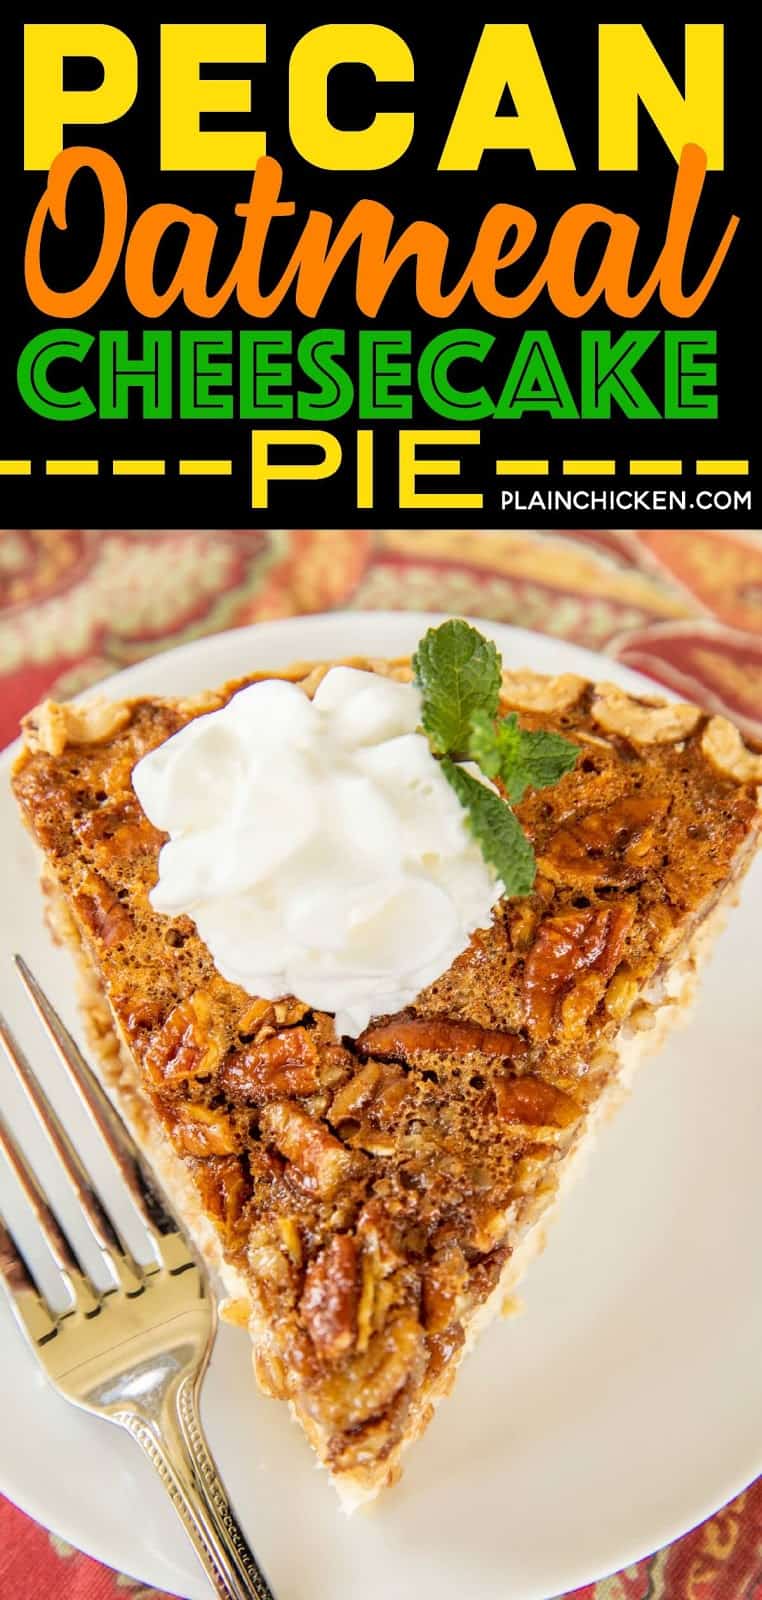 Pecan Oatmeal Cheesecake Pie - three favorites in one pie! A favorite for the holidays! Cream cheese, eggs, sugar, vanilla, oatmeal, pecans, corn syrup, cinnamon and pie crust. Can make a day in advance and refrigerate until ready to serve. I always have to double the recipe because everyone LOVES this delicious pie recipe!!! #pie #dessert #pecan #oatmeal #cheesecake #holidaydessert